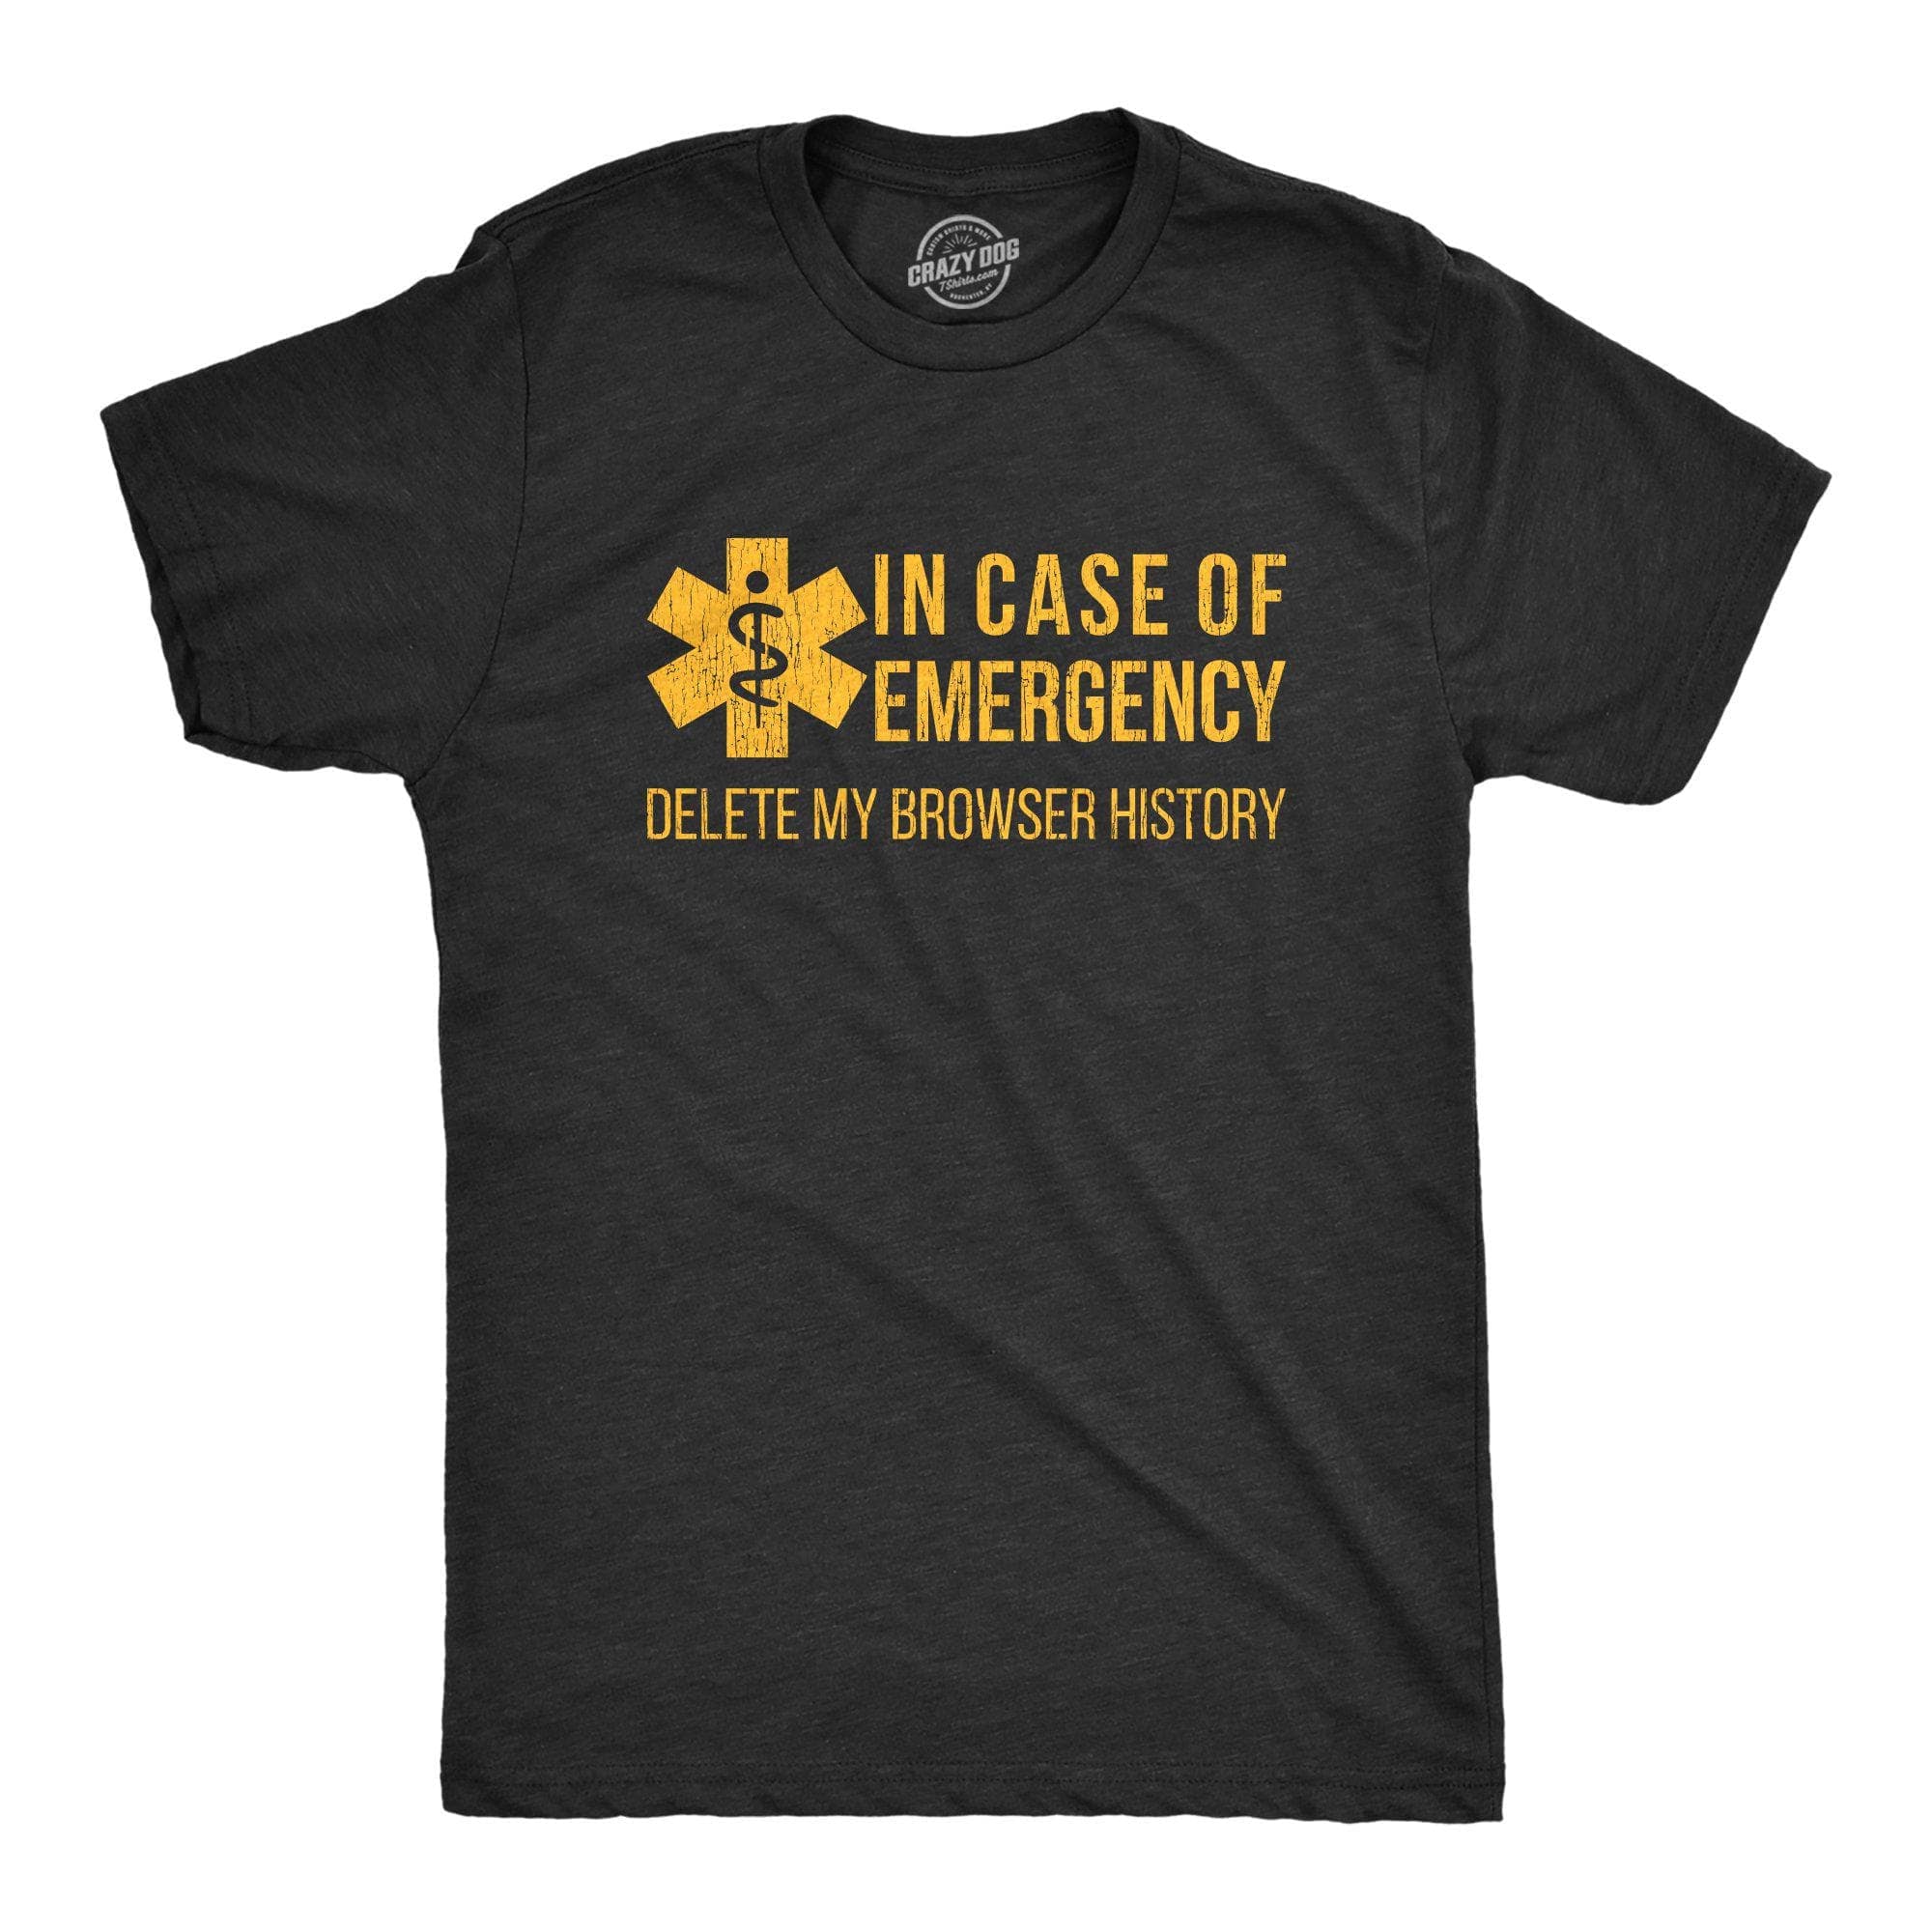 In Case Of Emergency Delete My Browser History Men's Tshirt - Crazy Dog T-Shirts